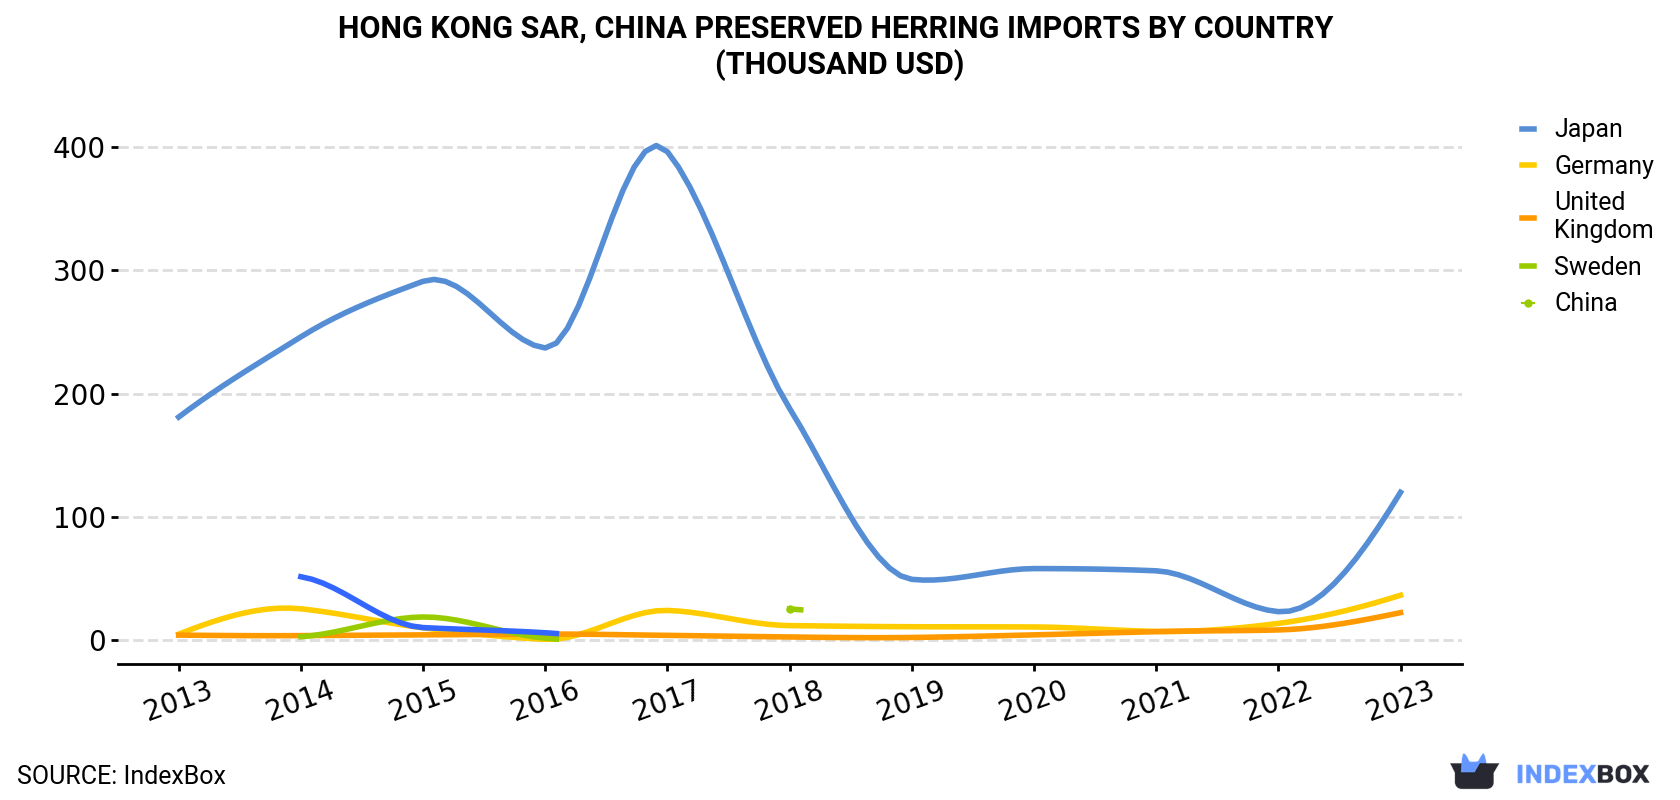 Hong Kong Preserved Herring Imports By Country (Thousand USD)